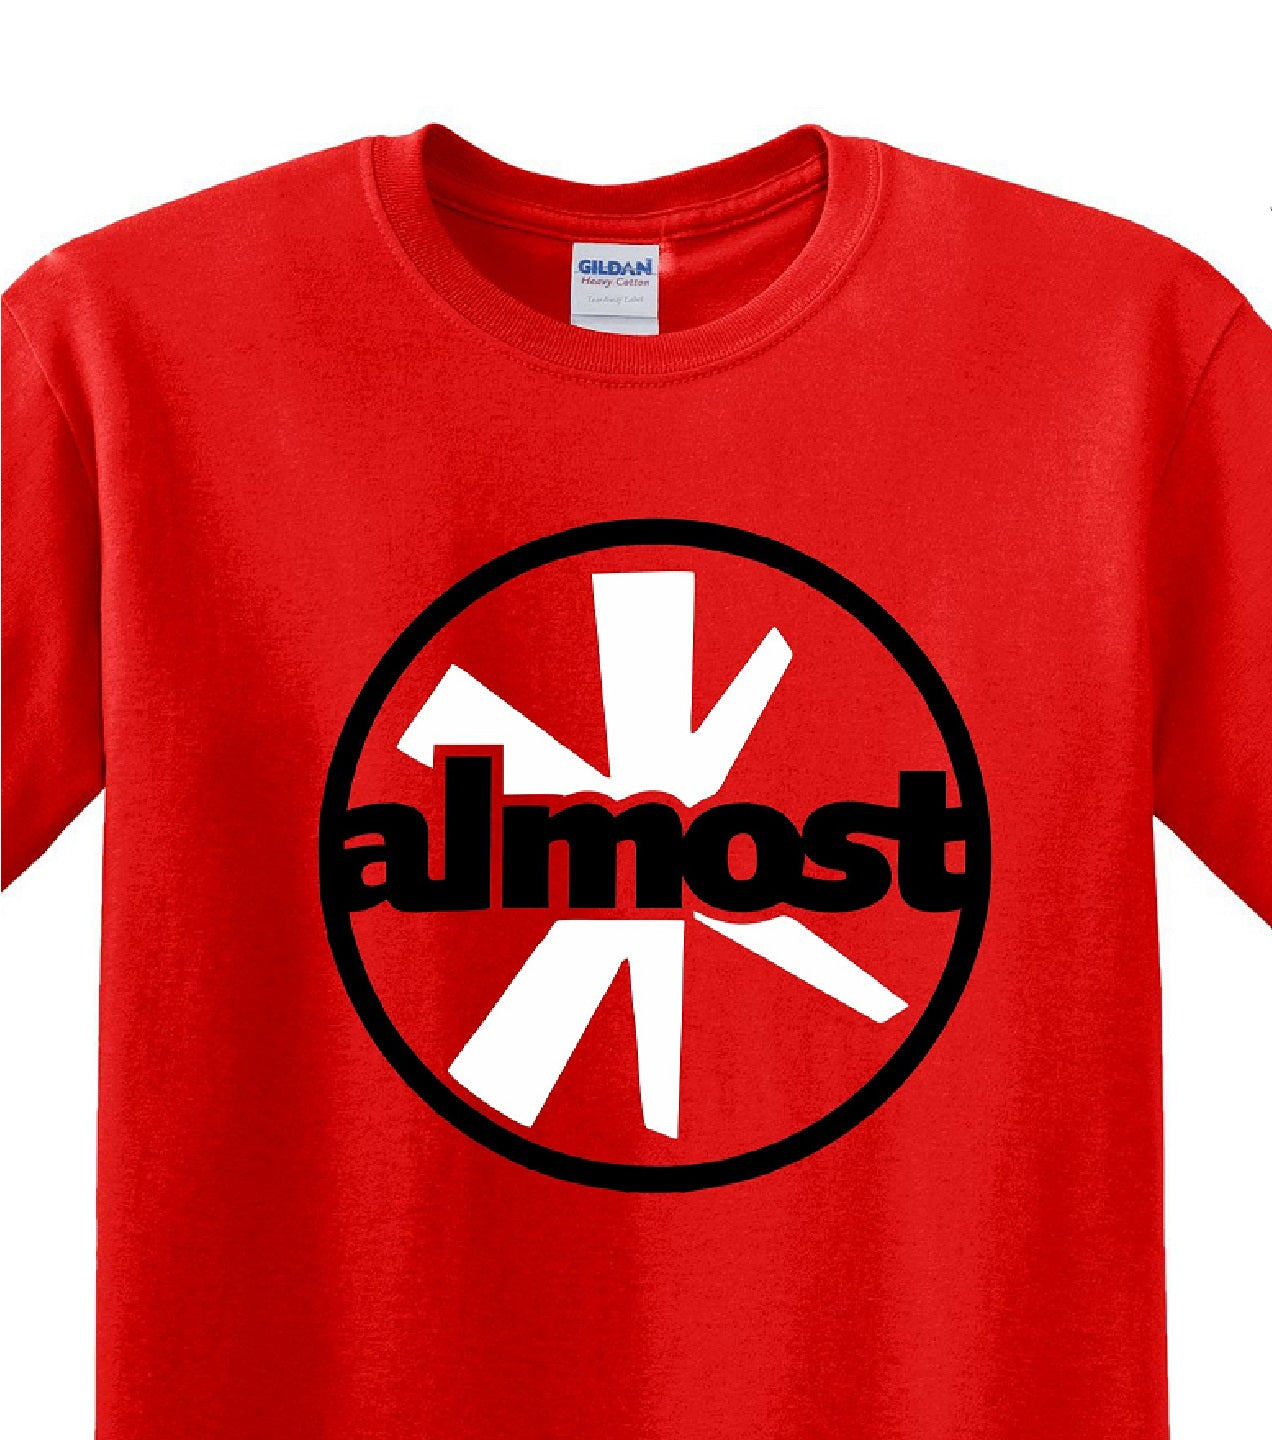 Skate Men's Shirt - Almost (Red) - MYSTYLEMYCLOTHING